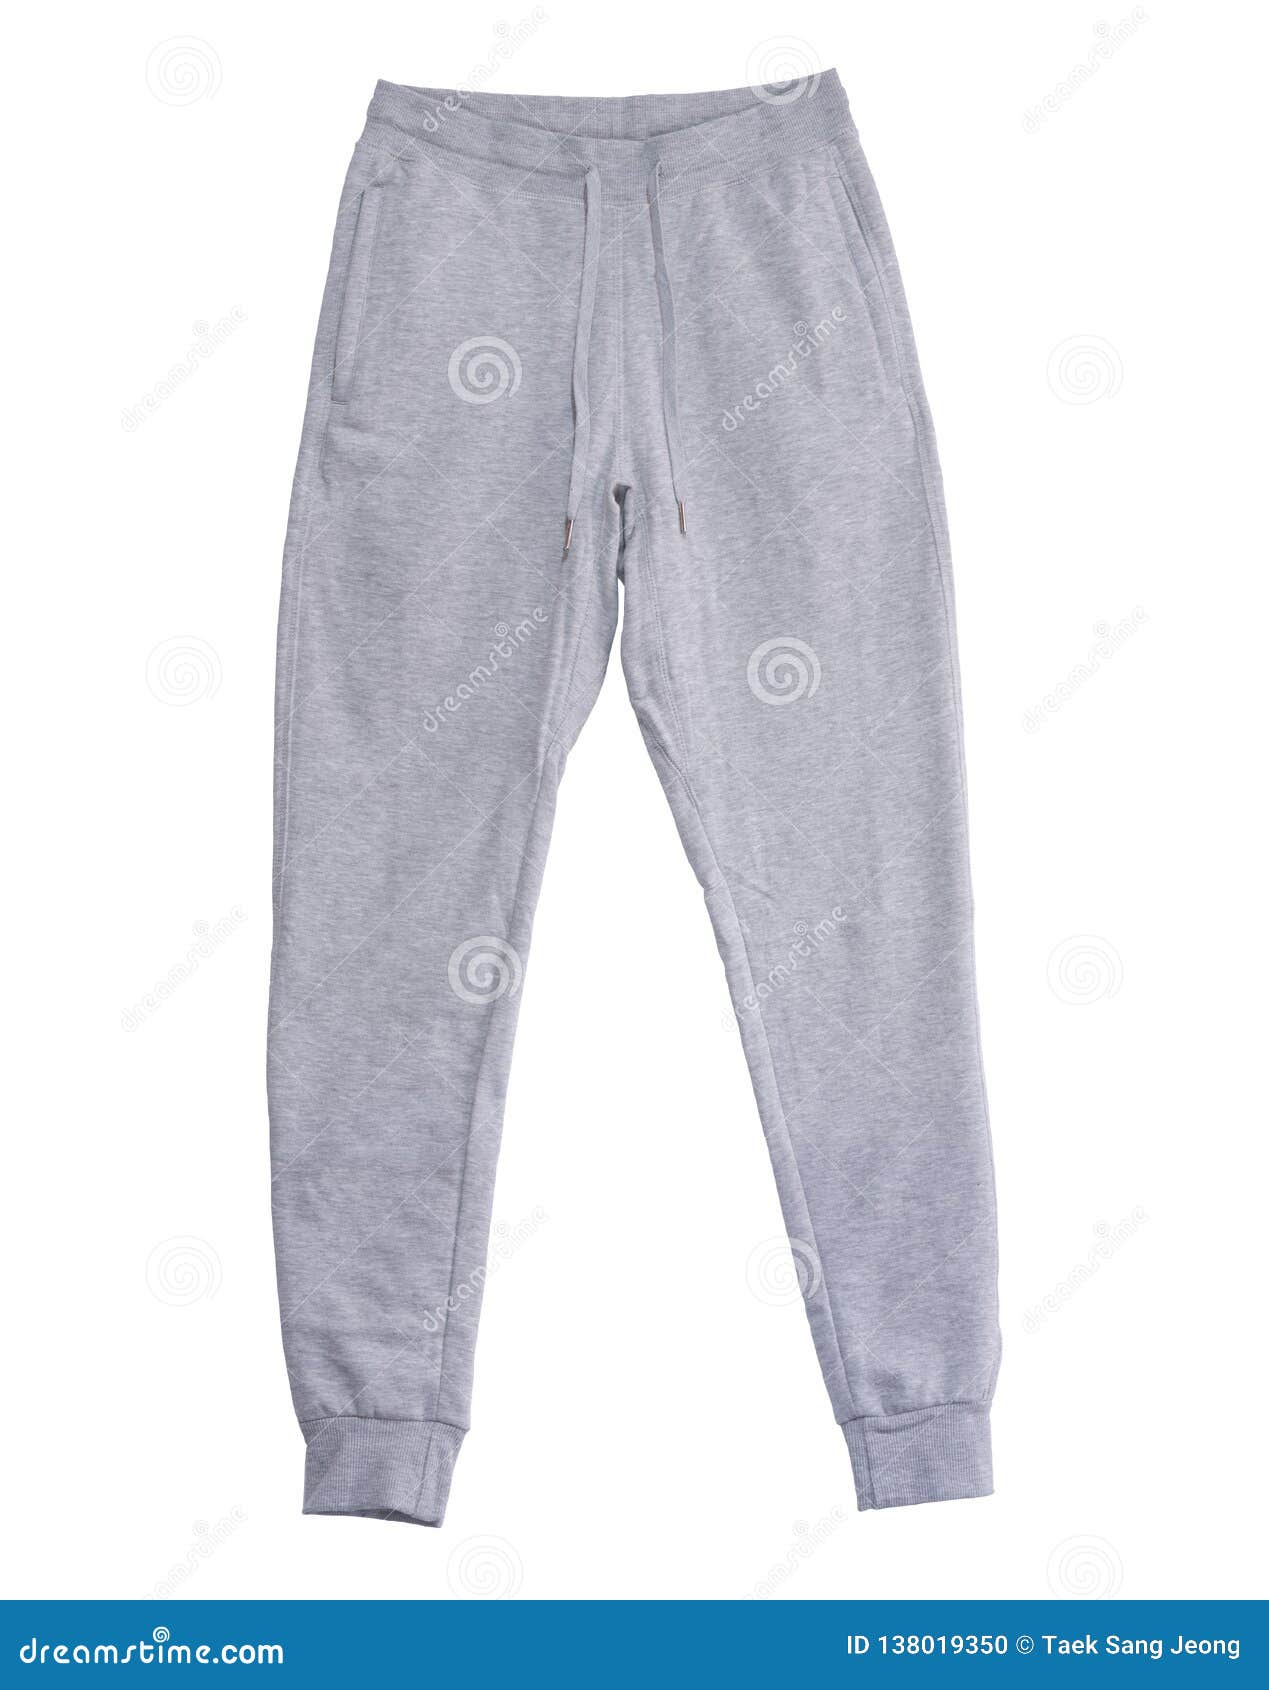 Blank Training Jogger Pants Color Grey Front View Stock Photo - Image ...